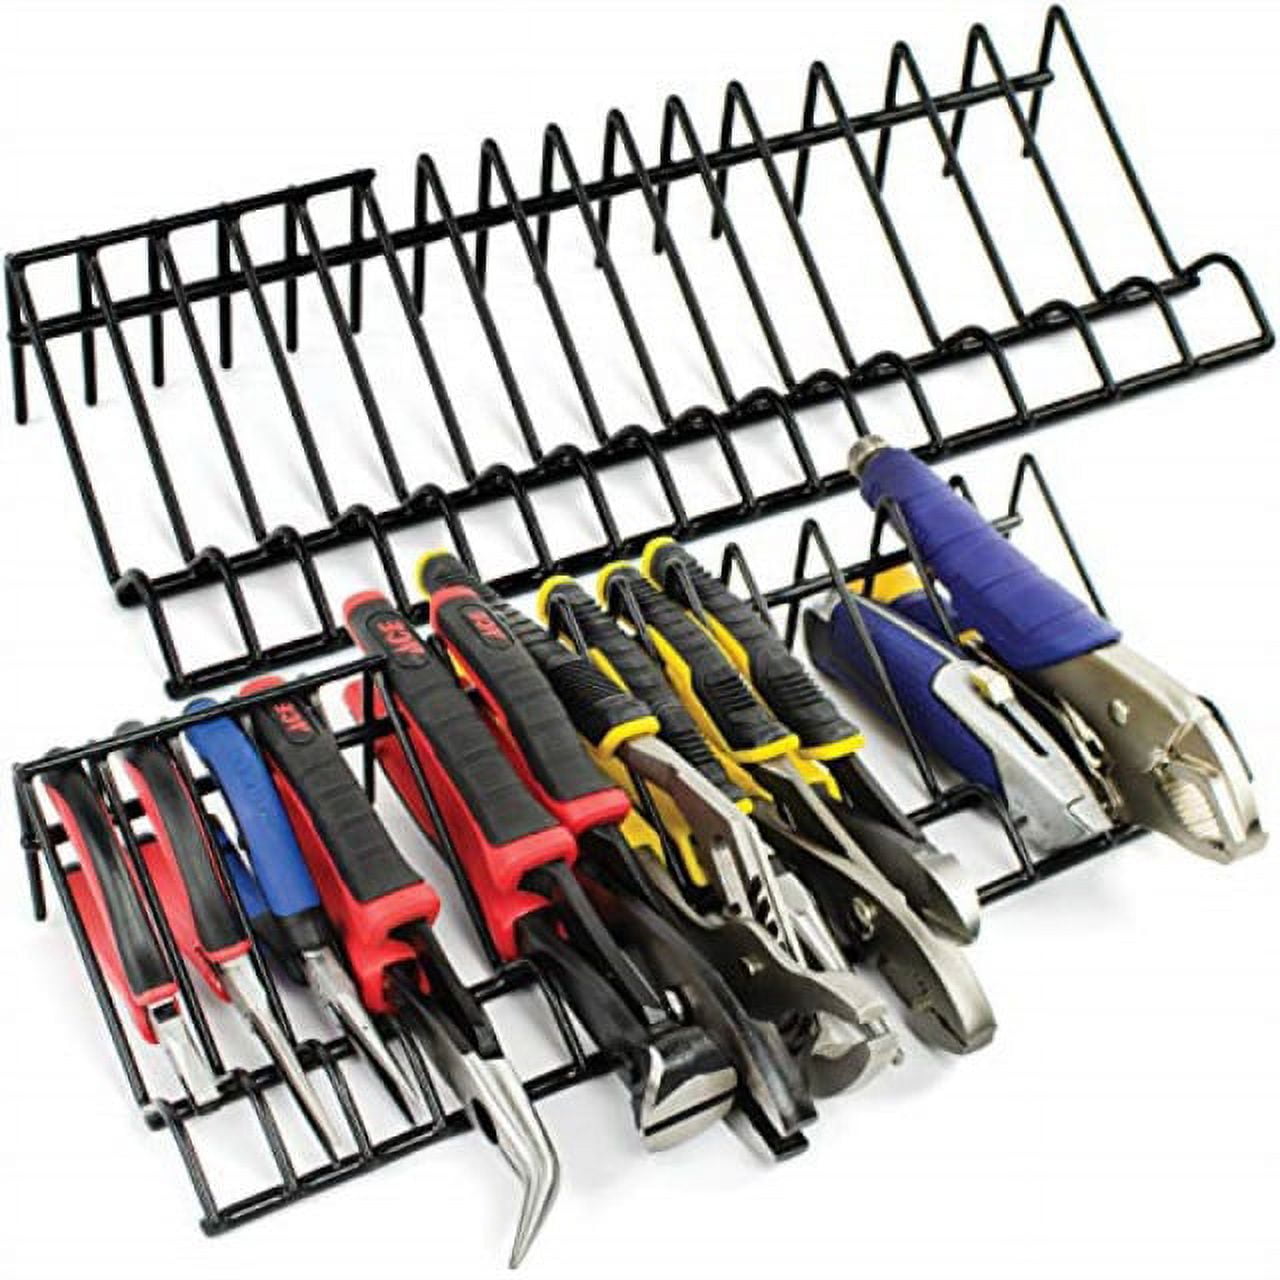 AIRTOON Plier Organizer Rack, Pliers Cutters Organizer, Stores Spring  Loaded, Durable Black Rack Fits Most Toolboxes, Drawers, 2 Pack 